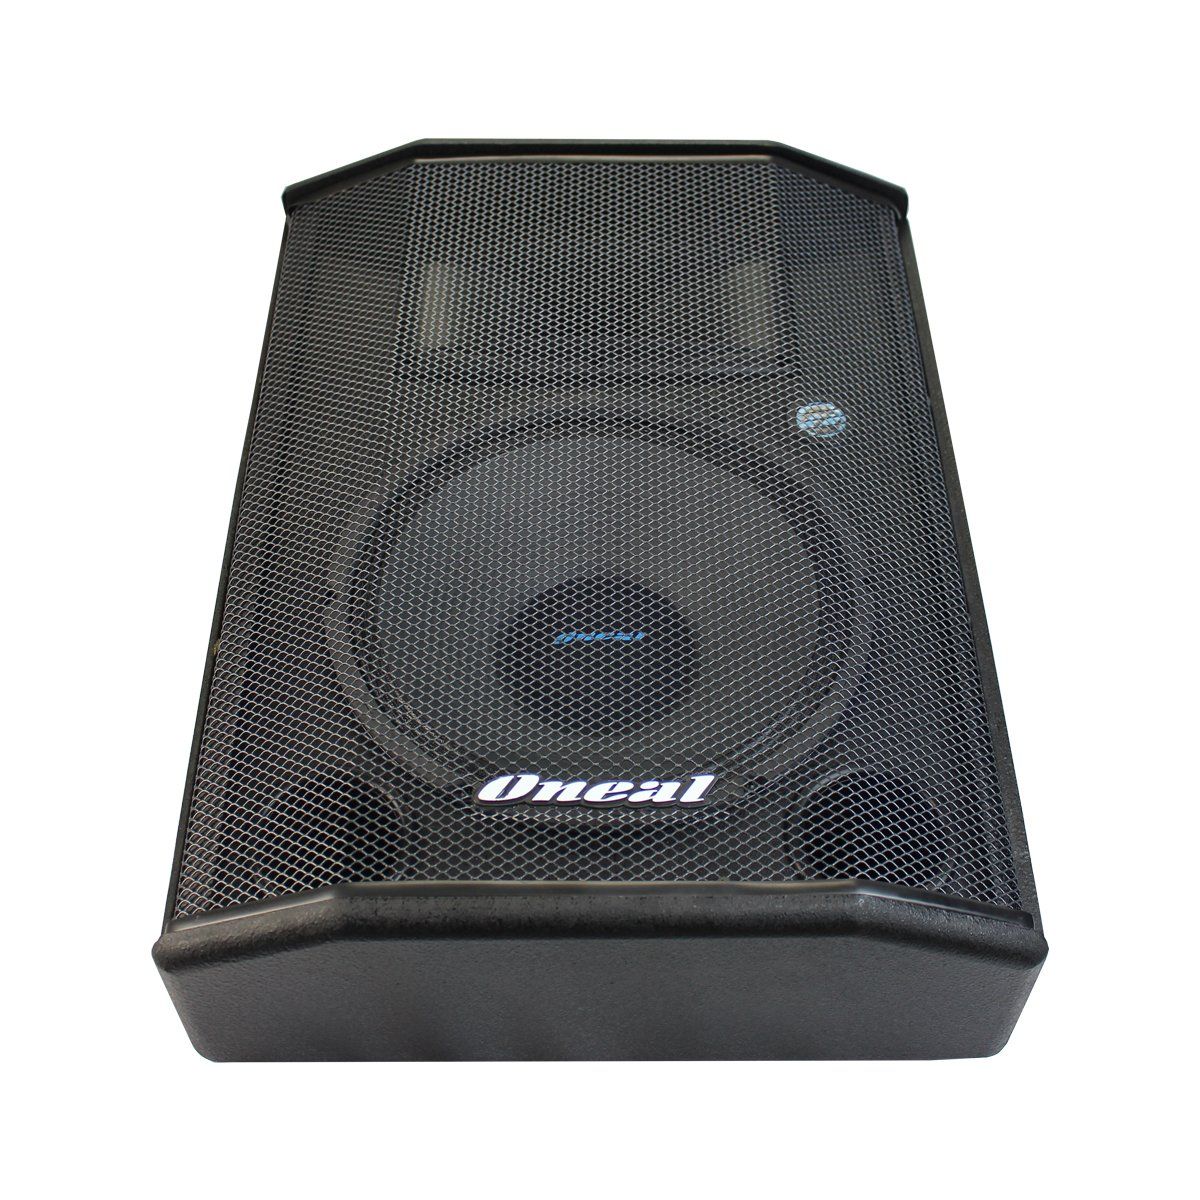 MONITOR ATIVO 200W RMS PTO OPM-735 ONEAL